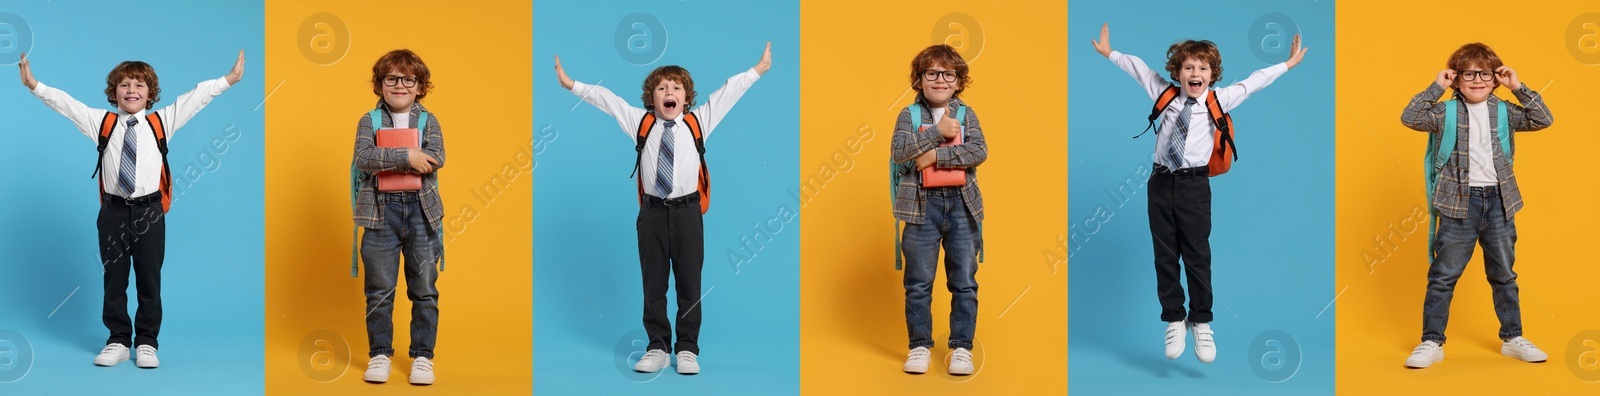 Image of Happy schoolboy on color backgrounds, set of photos